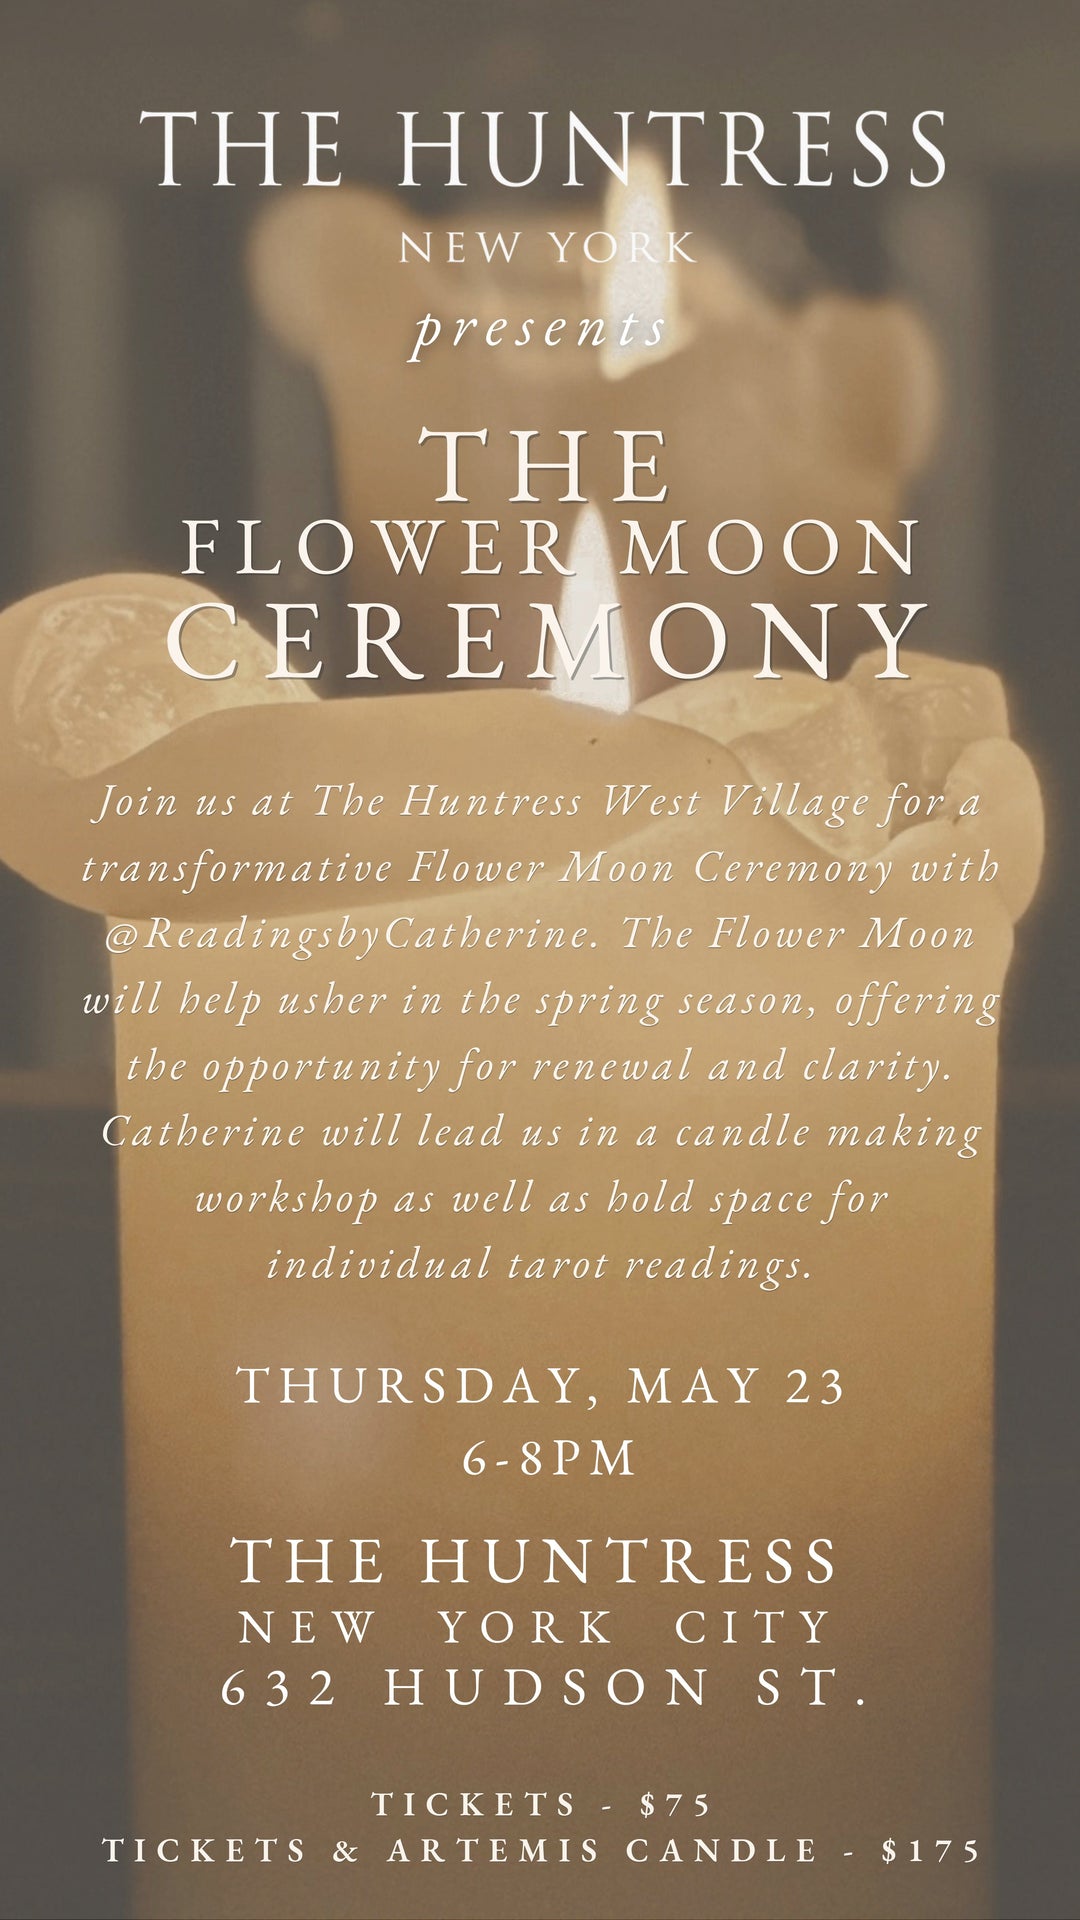 The Huntress New York Event The Flower Moon Ceremony | NYC